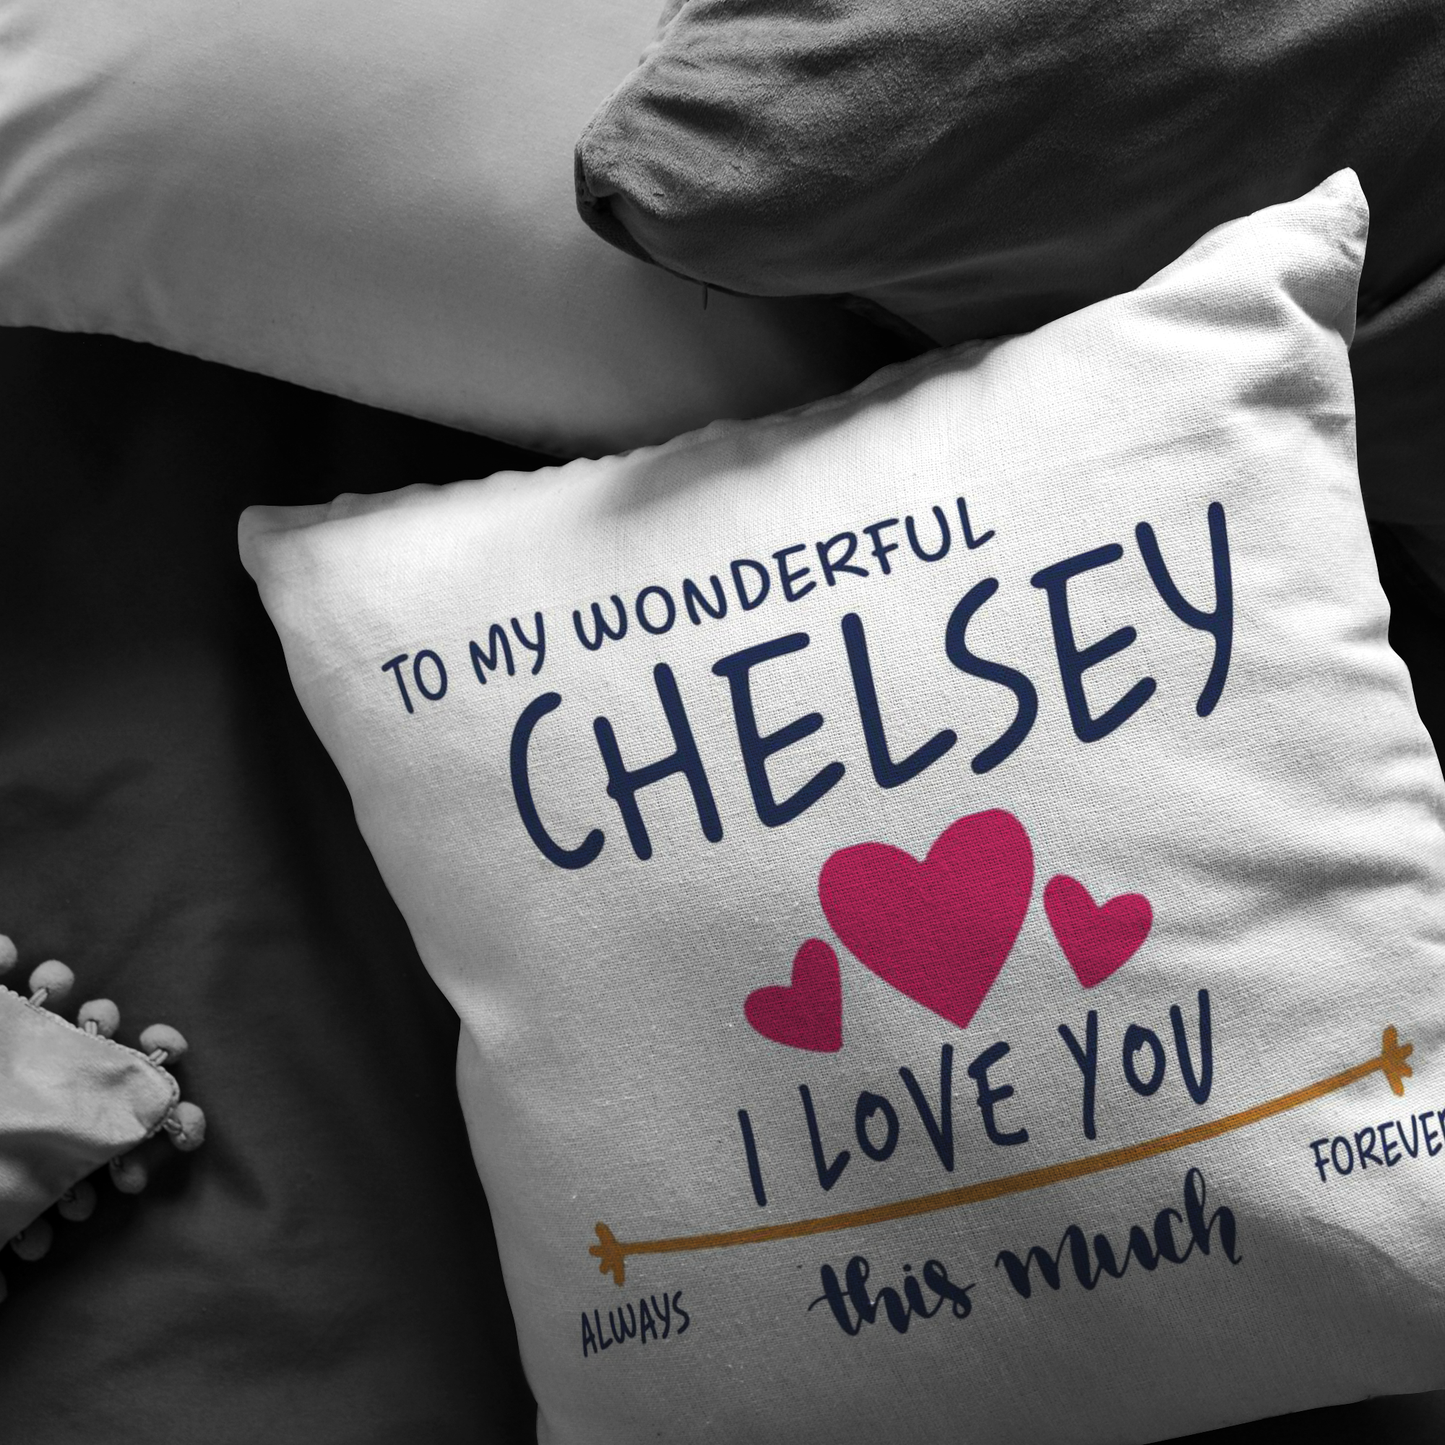 PL-21251603-sp-22206 - Valentines Day Pillow Covers 18x18 - to My Wonderful Chelsey